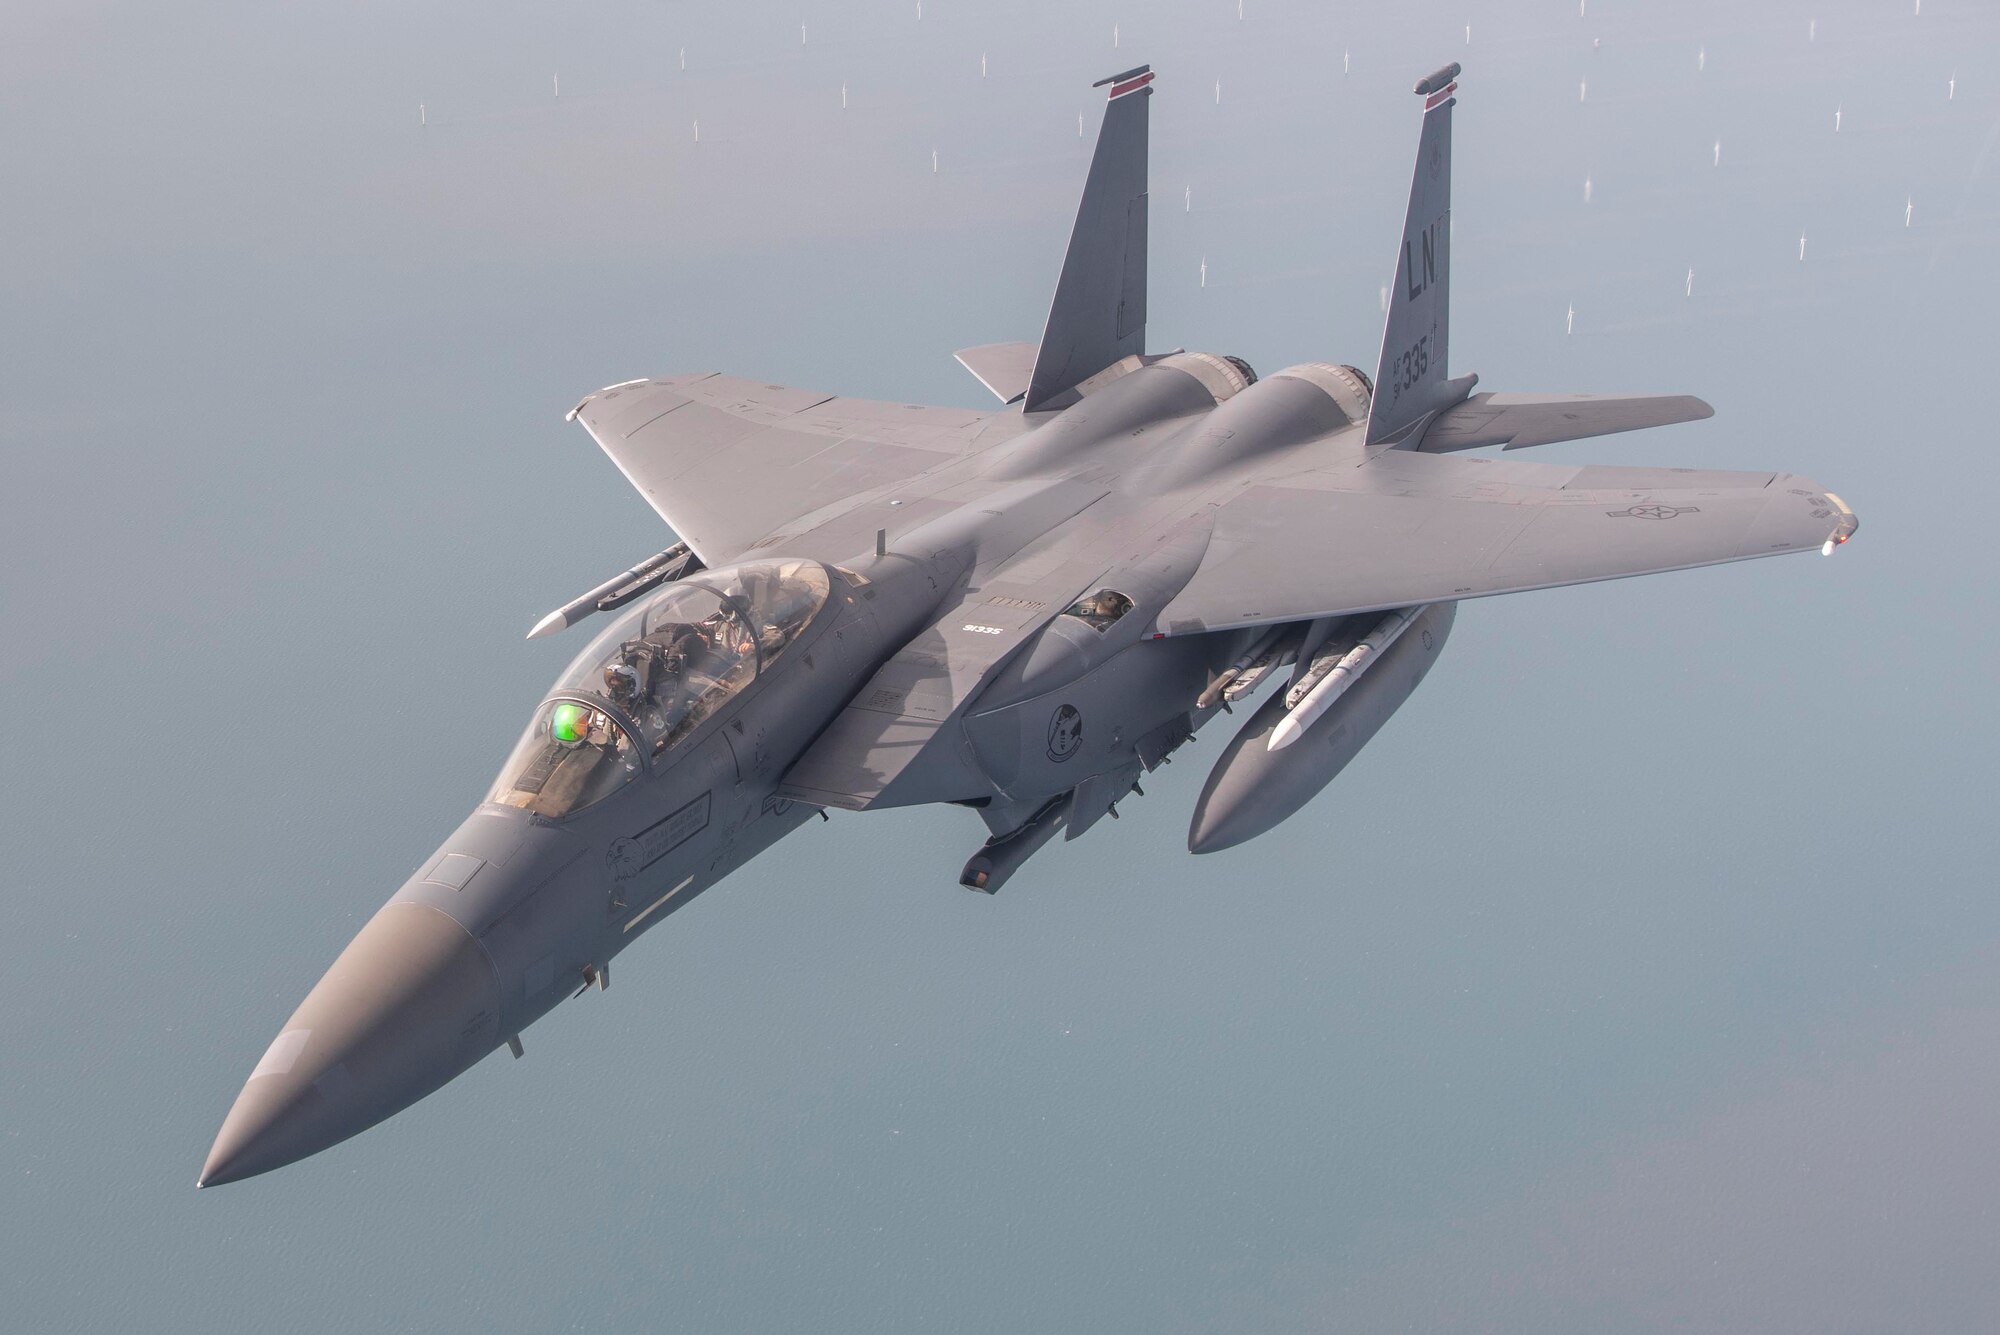 A U.S. Air Force F-15E Strike Eagle aircraft, assigned to the 493rd Fighter Squadron, Royal Air Force Lakenheath, England, peels away after receiving fuel from a U.S. Air Force KC-135 Strato-tanker aircraft, assigned to the 100th Air Refueling Wing, RAF Mildenhall, England, off the coast of the United Kingdom during Exercise Wolff Pack, Sept. 30, 2020. Airmen from the 100th ARW conducted aerial-refueling operations from air bases across Europe, confirming their ability to pro-tect and defend partners, allies and U.S. interests at a moment’s notice. (U.S. Air Force photo by Airman 1st Class Joseph Barron)